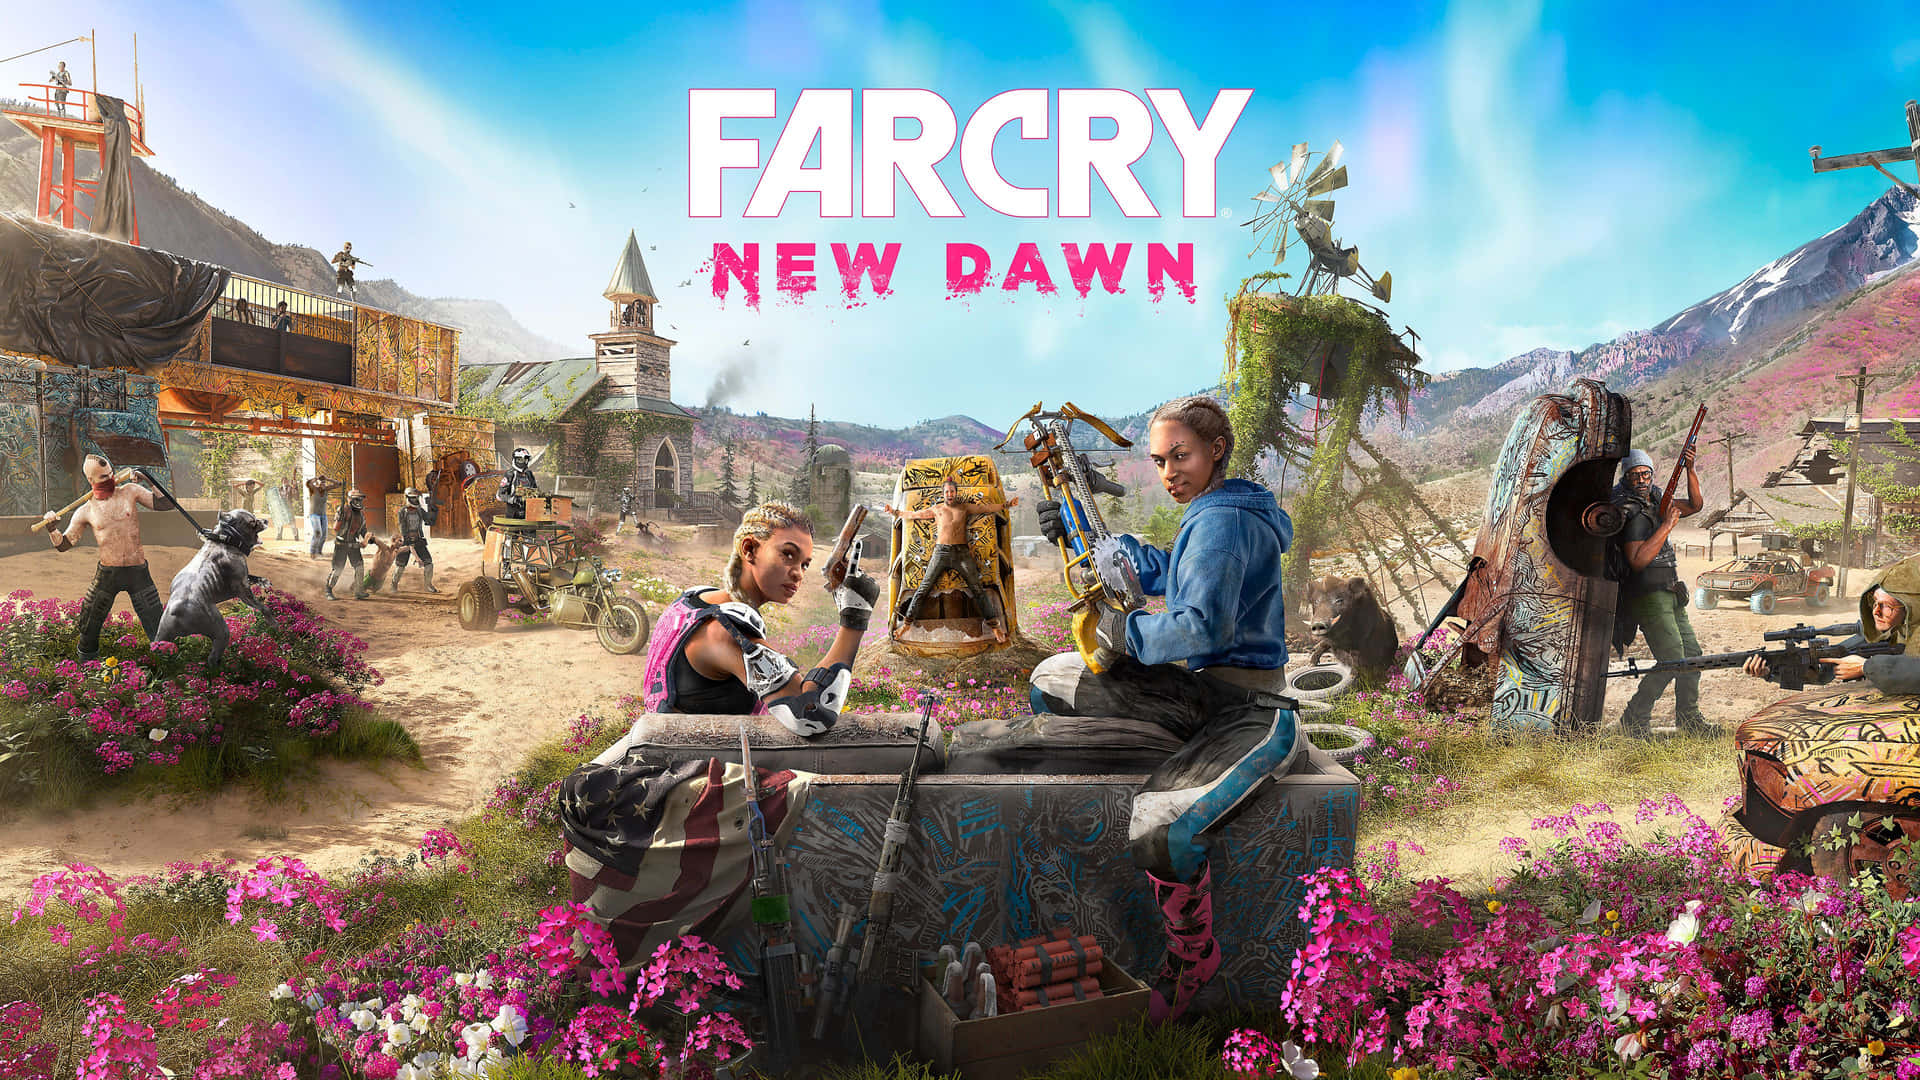 1440p Far Cry New Dawn Background Game Poster Background